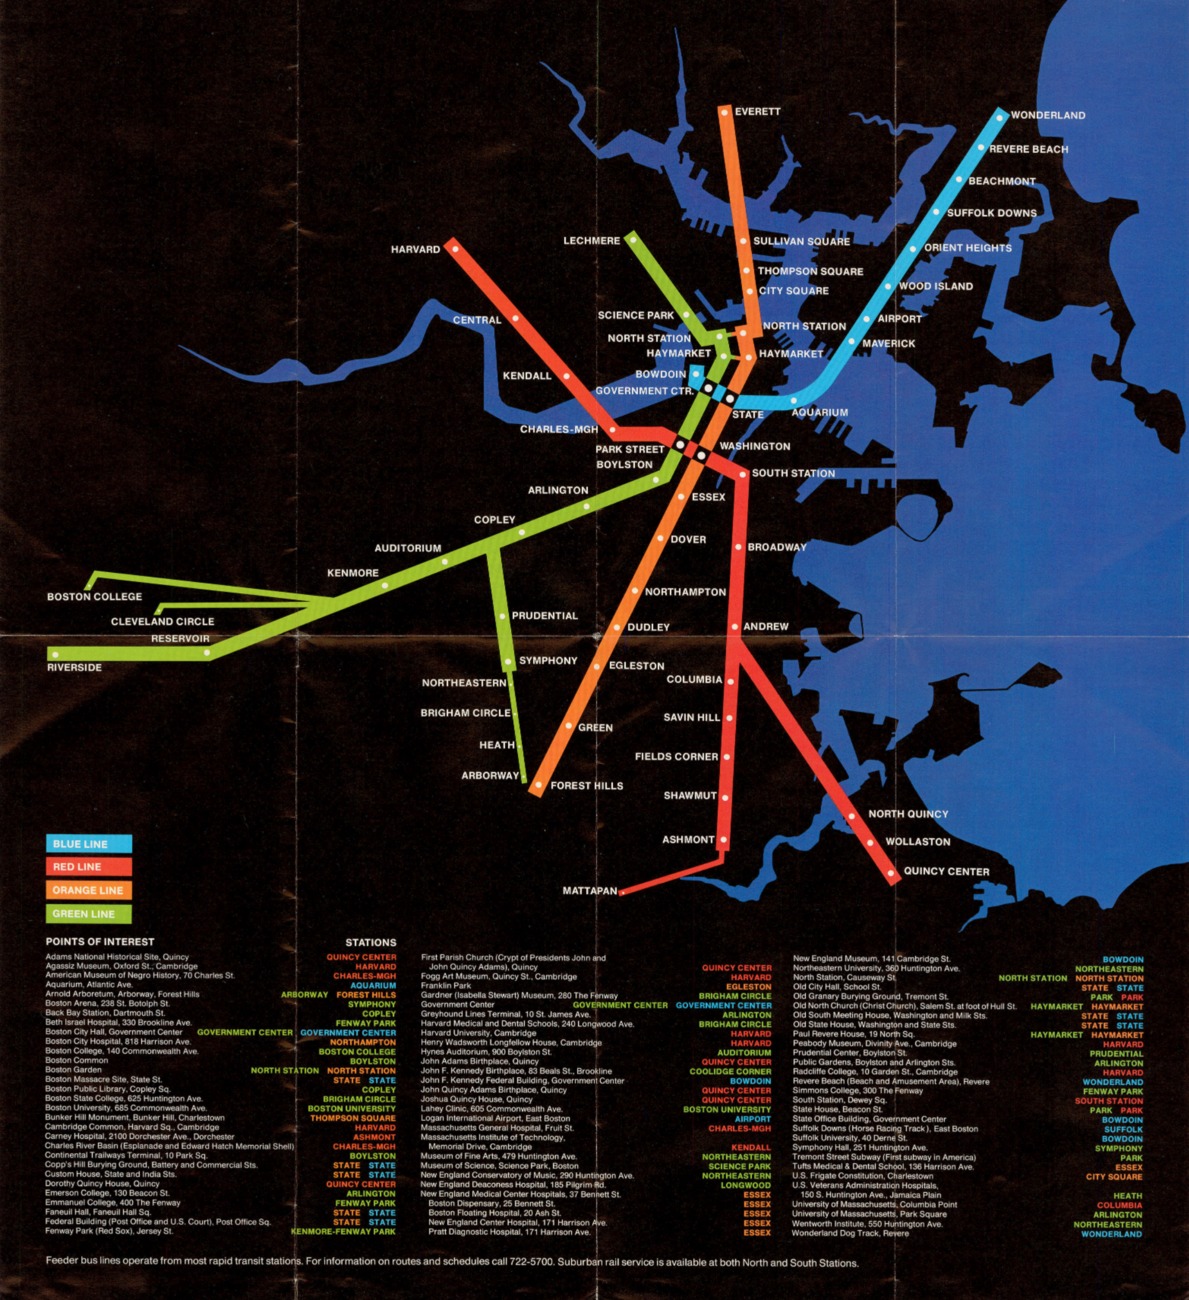 This version of the spider map shows the four lines against a solid black background, with waterways in dark blue. Instead of being placed at 45 or 90 degree angles, service lines are shown at less stylized, more realistic angles. Stations are listed in columns below the map, also on a black background, with each station's name printed in the color of its subway or trolley line.